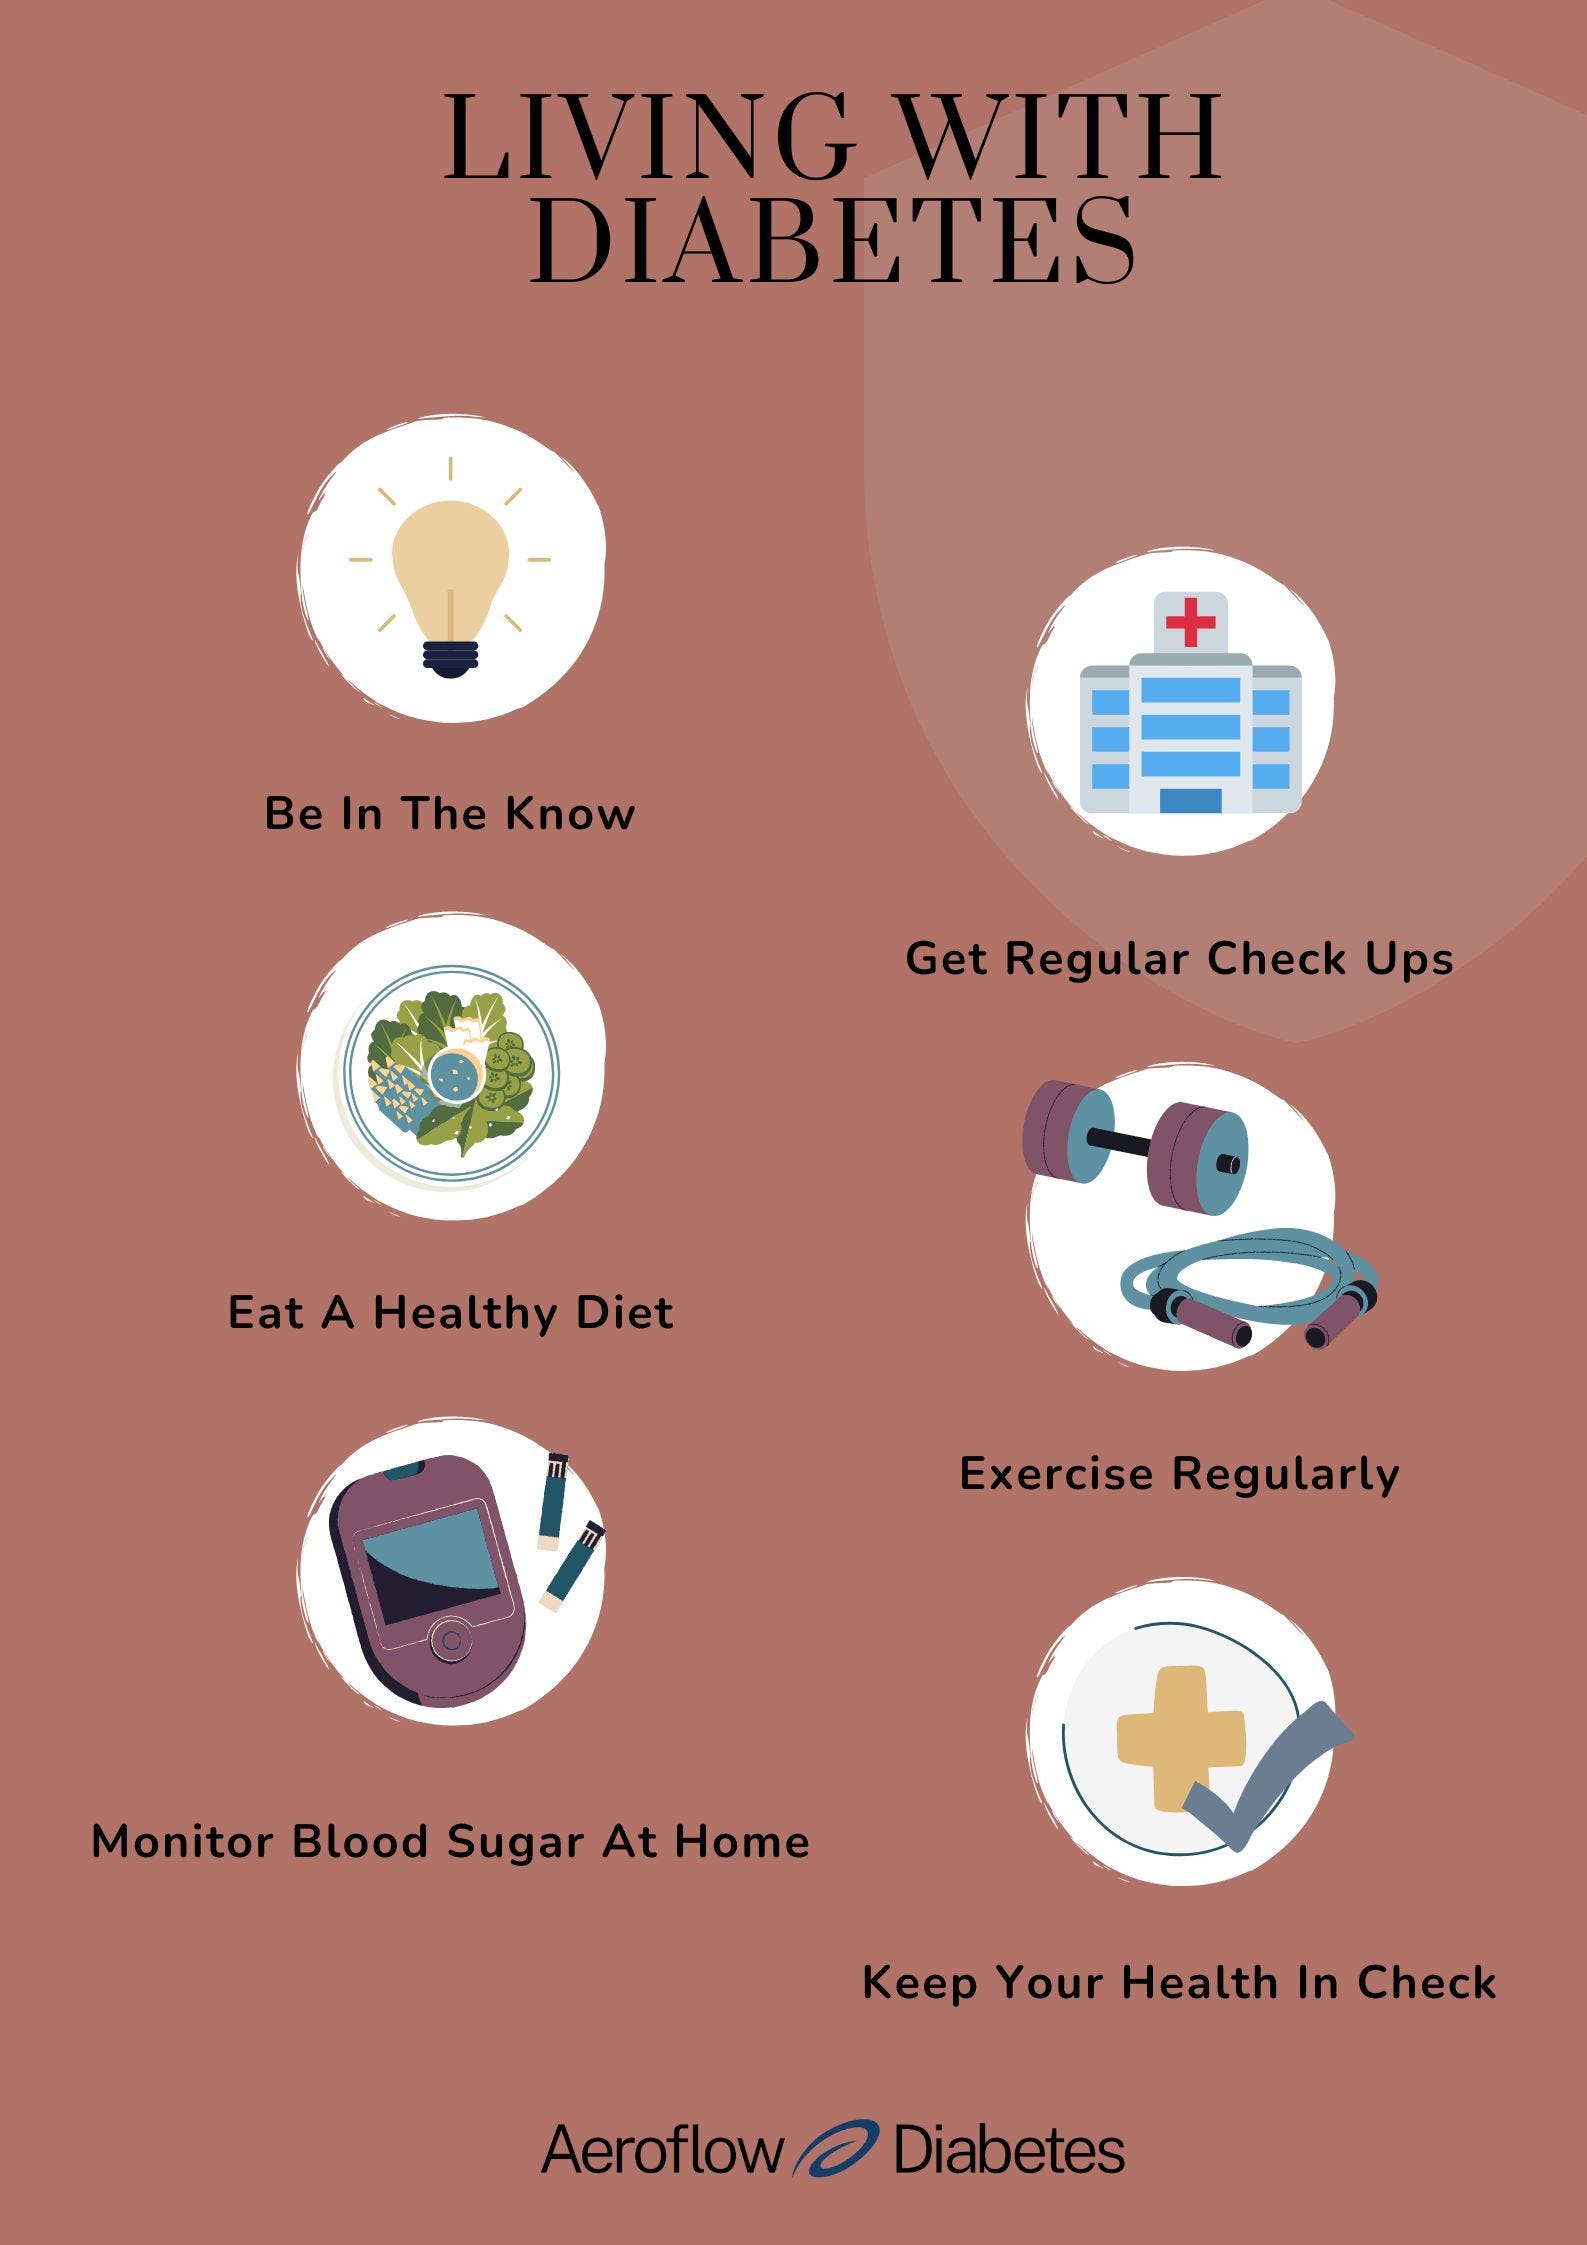 Living with diabetes chart